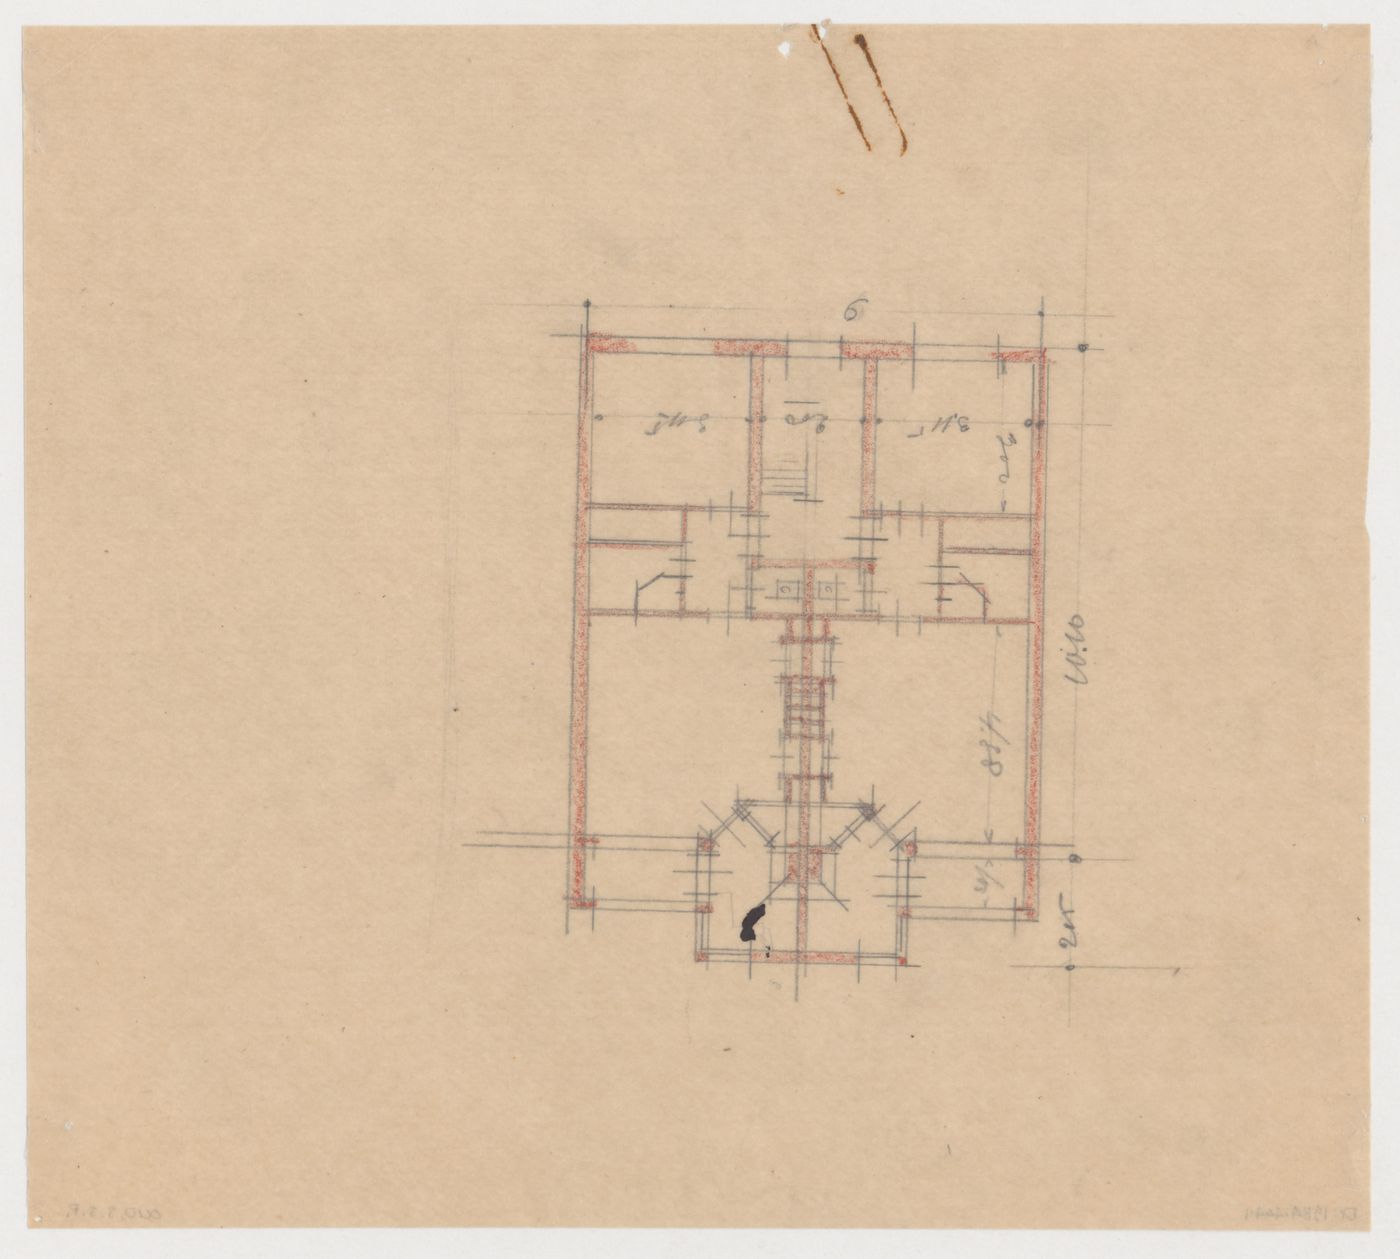 Plan, possibly for Standard Workers' Housing, Rotterdam, Netherlands